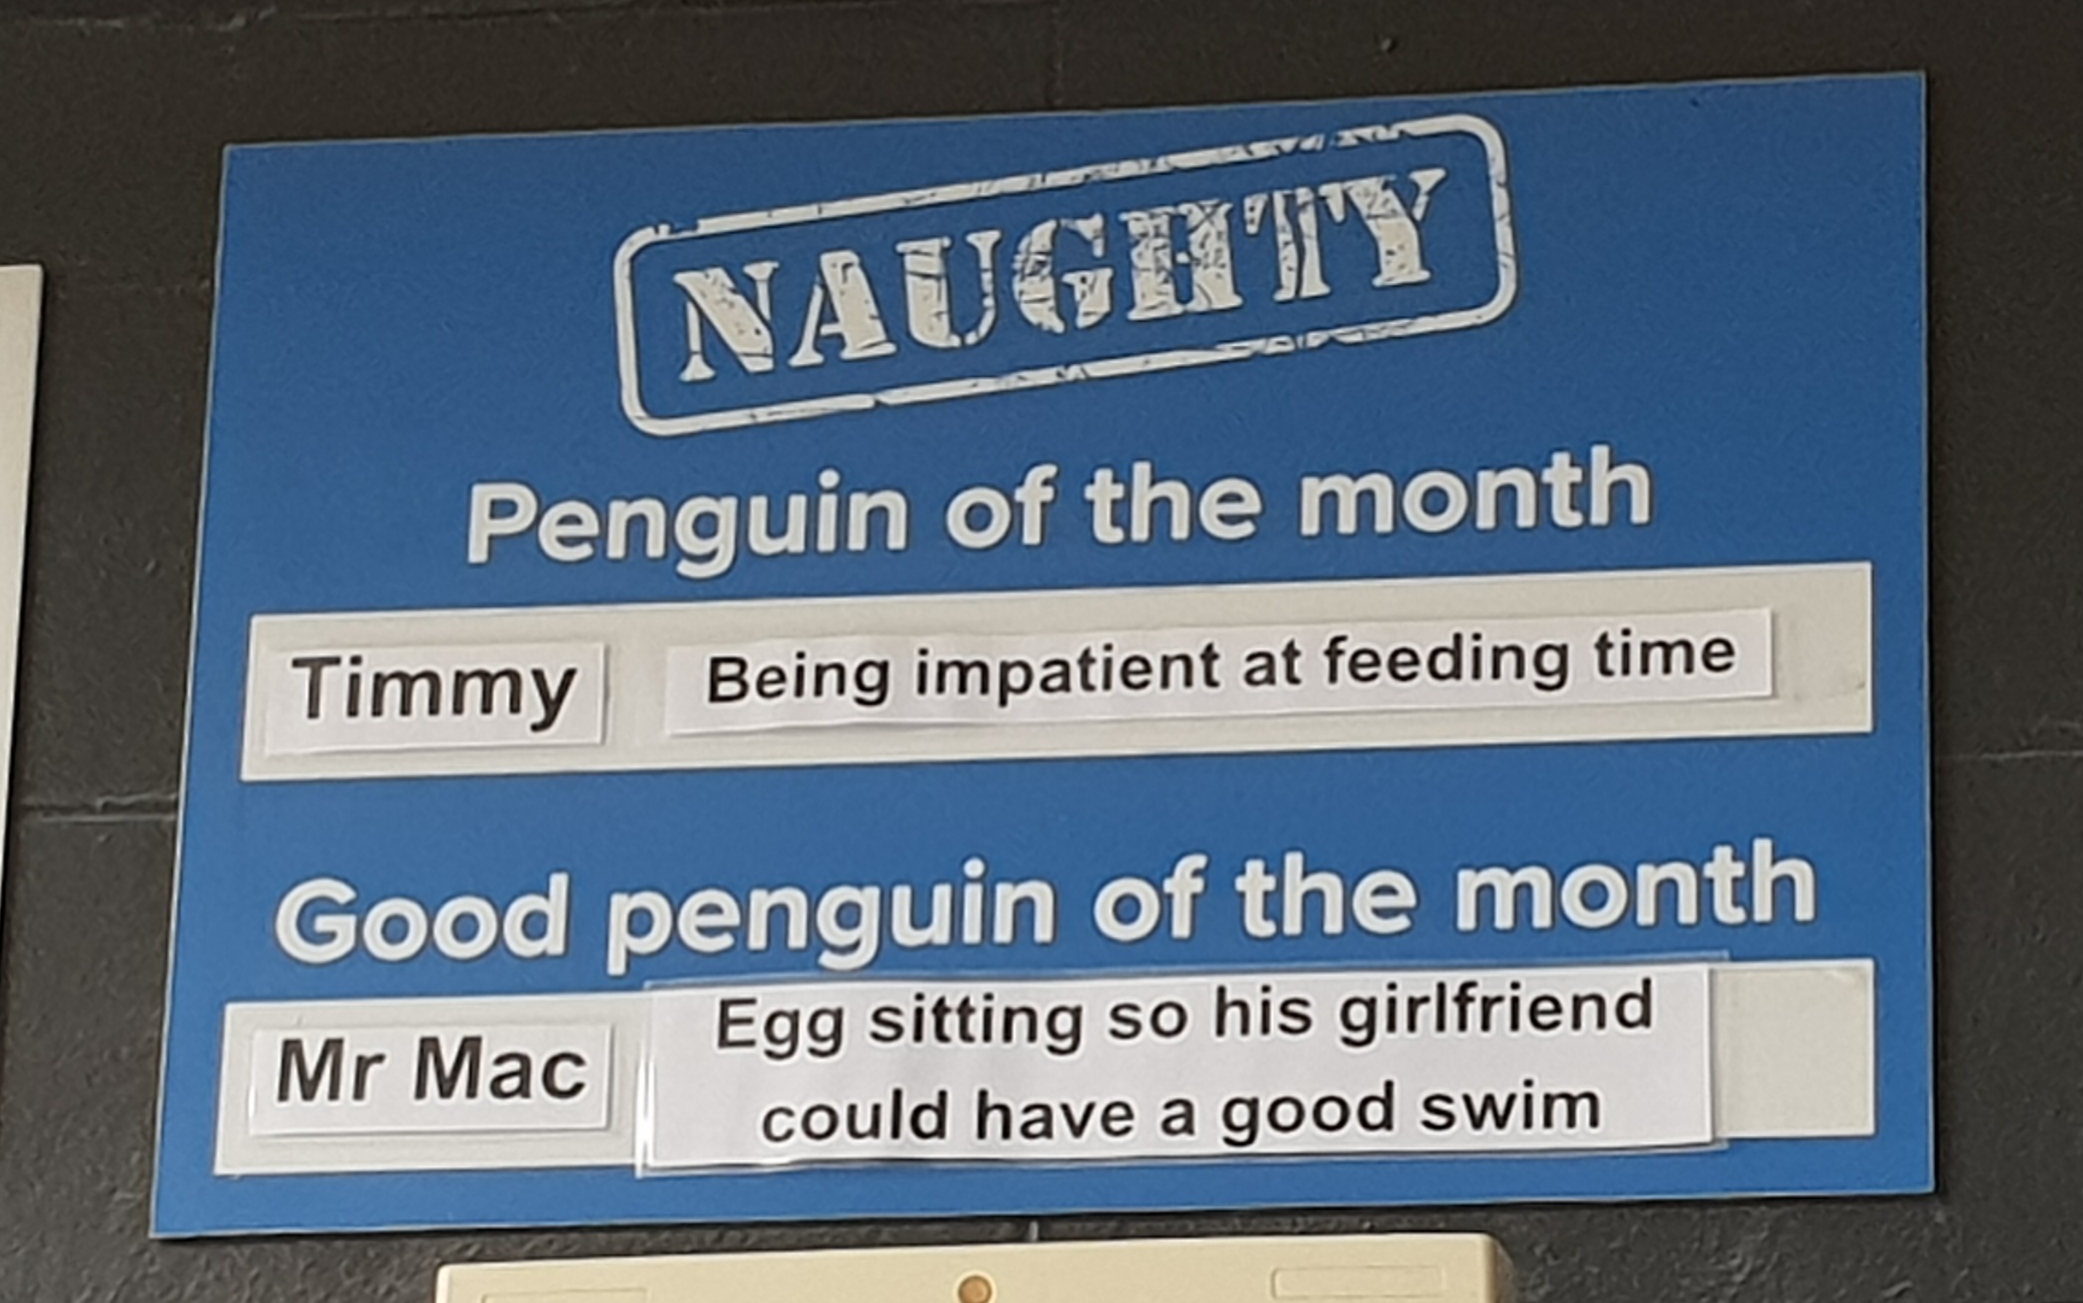 signage - Naughty Penguin of the month Timmy Being impatient at feeding time Good penguin of the month Mr Mac Egg sitting so his girlfriend could have a good swim